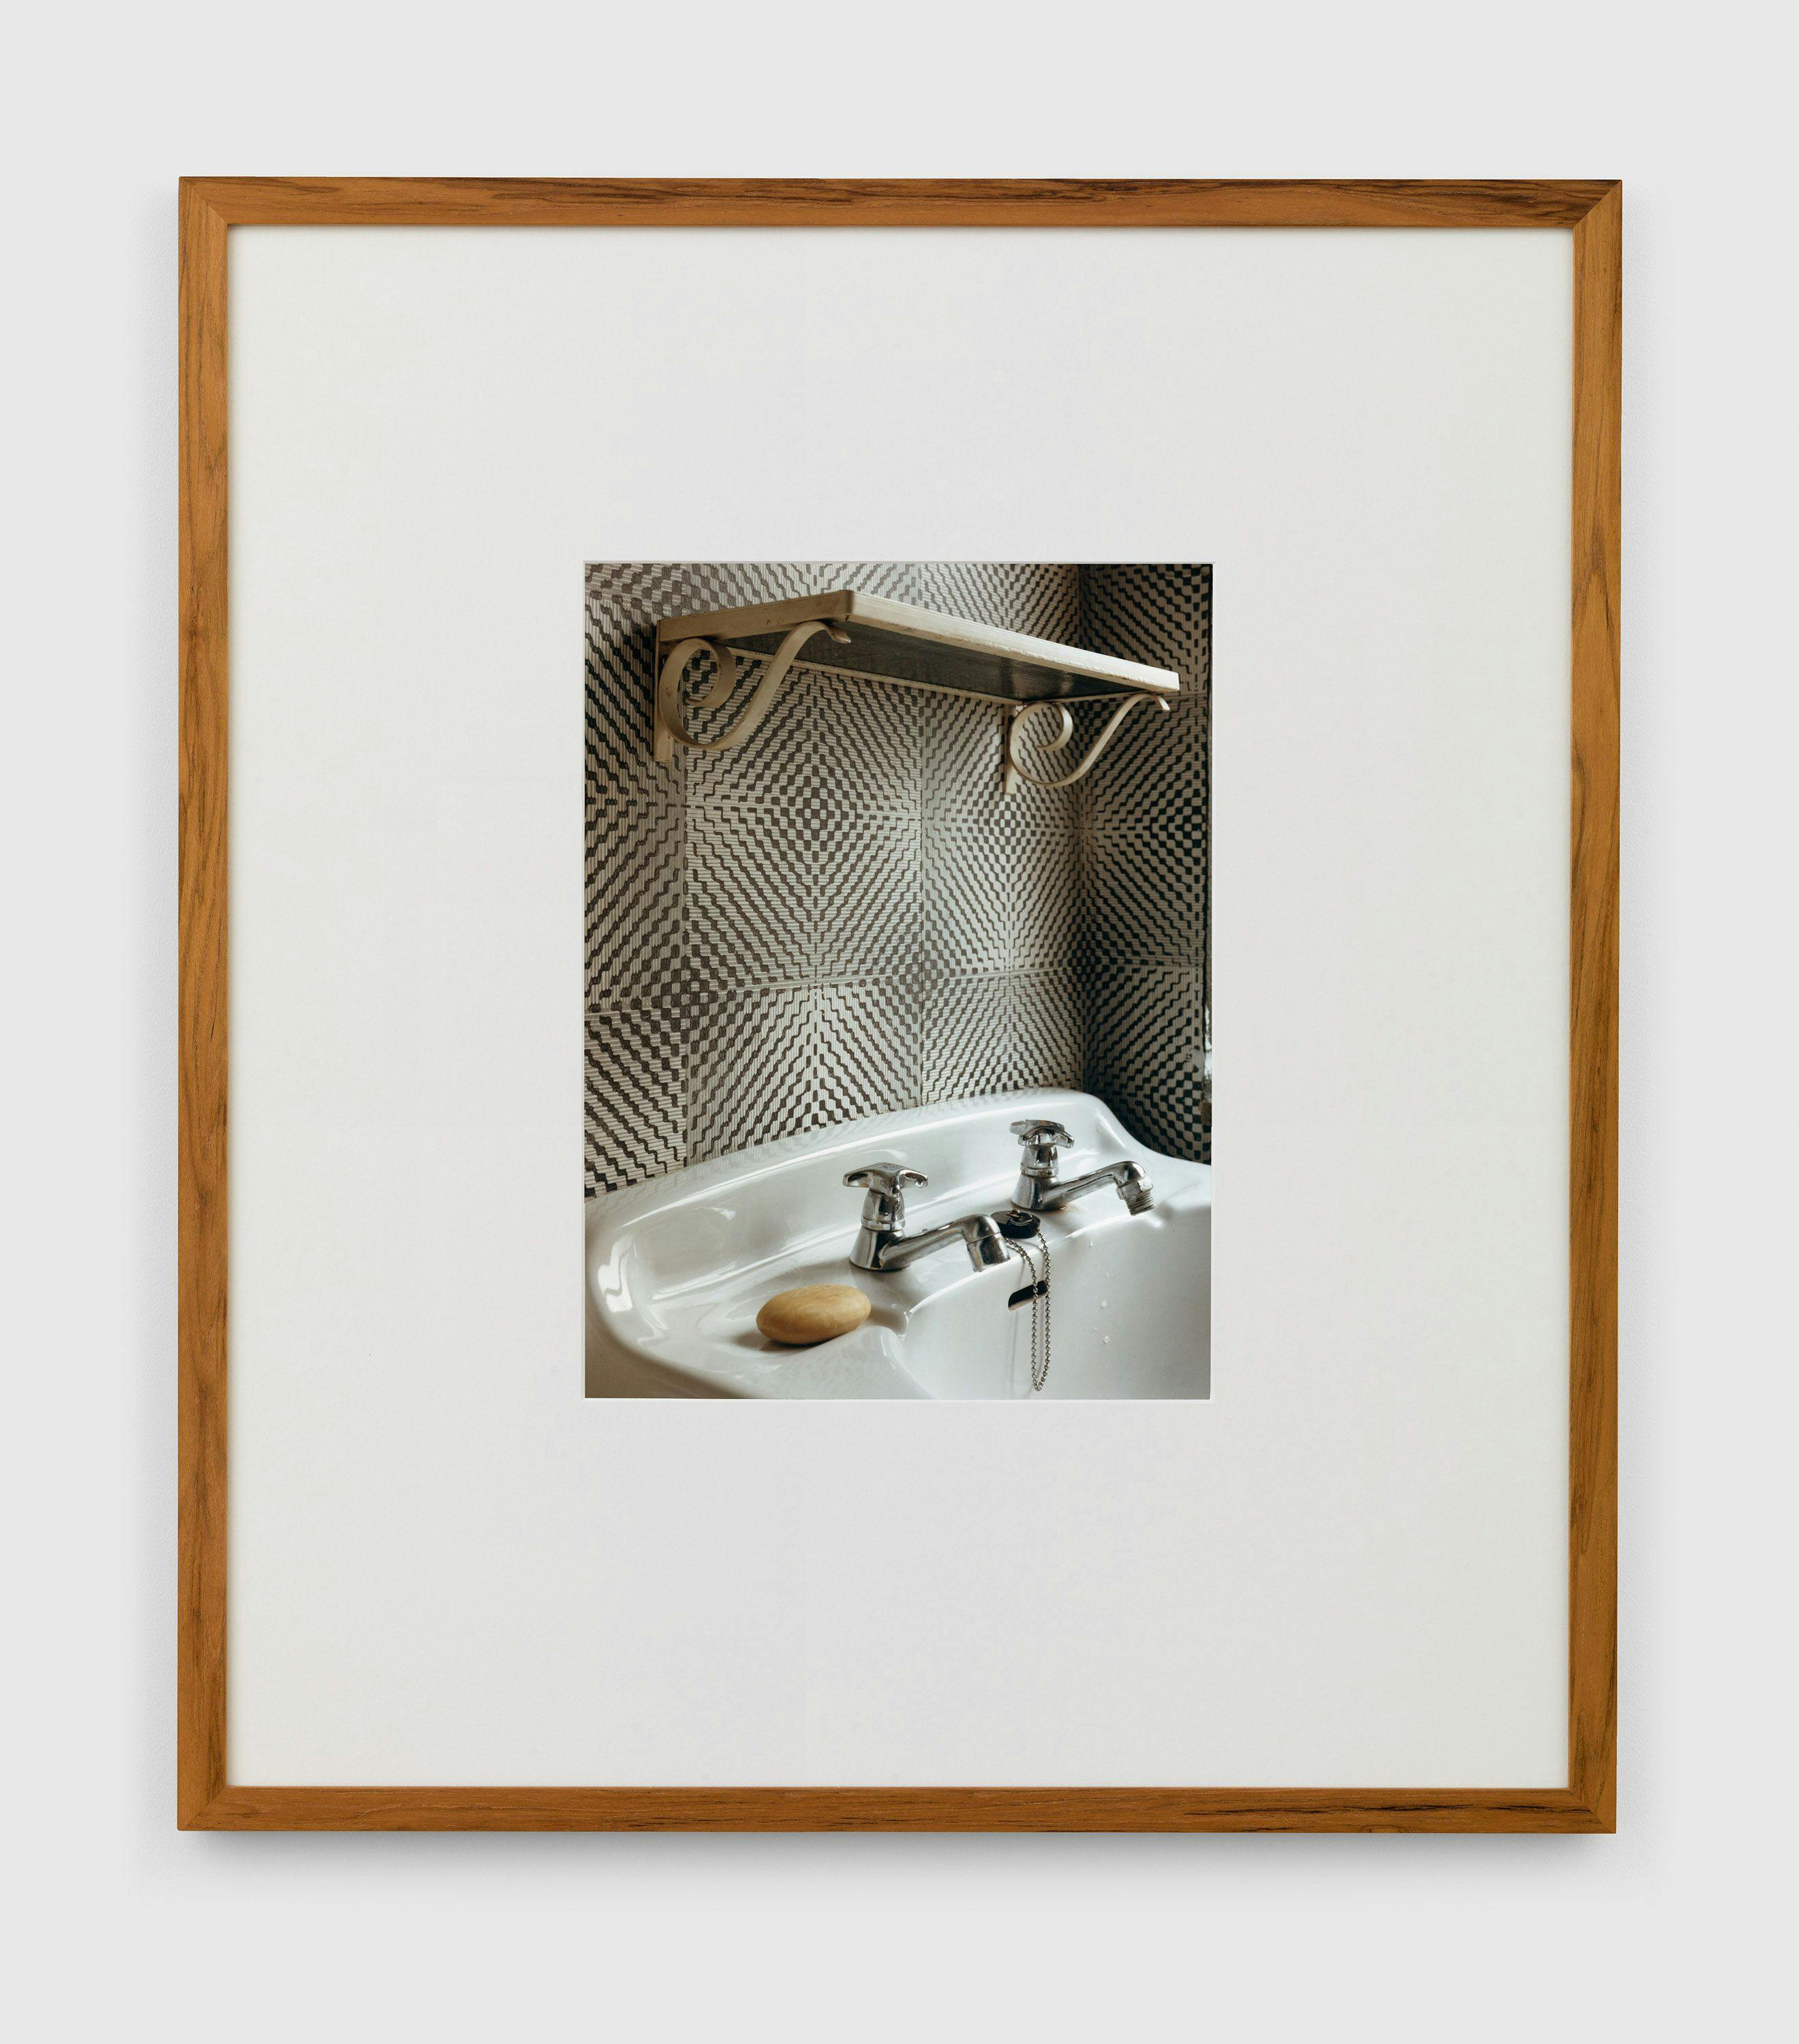 A chromogenic print by Thomas Ruff, titled Interior 1A, dated 1979.